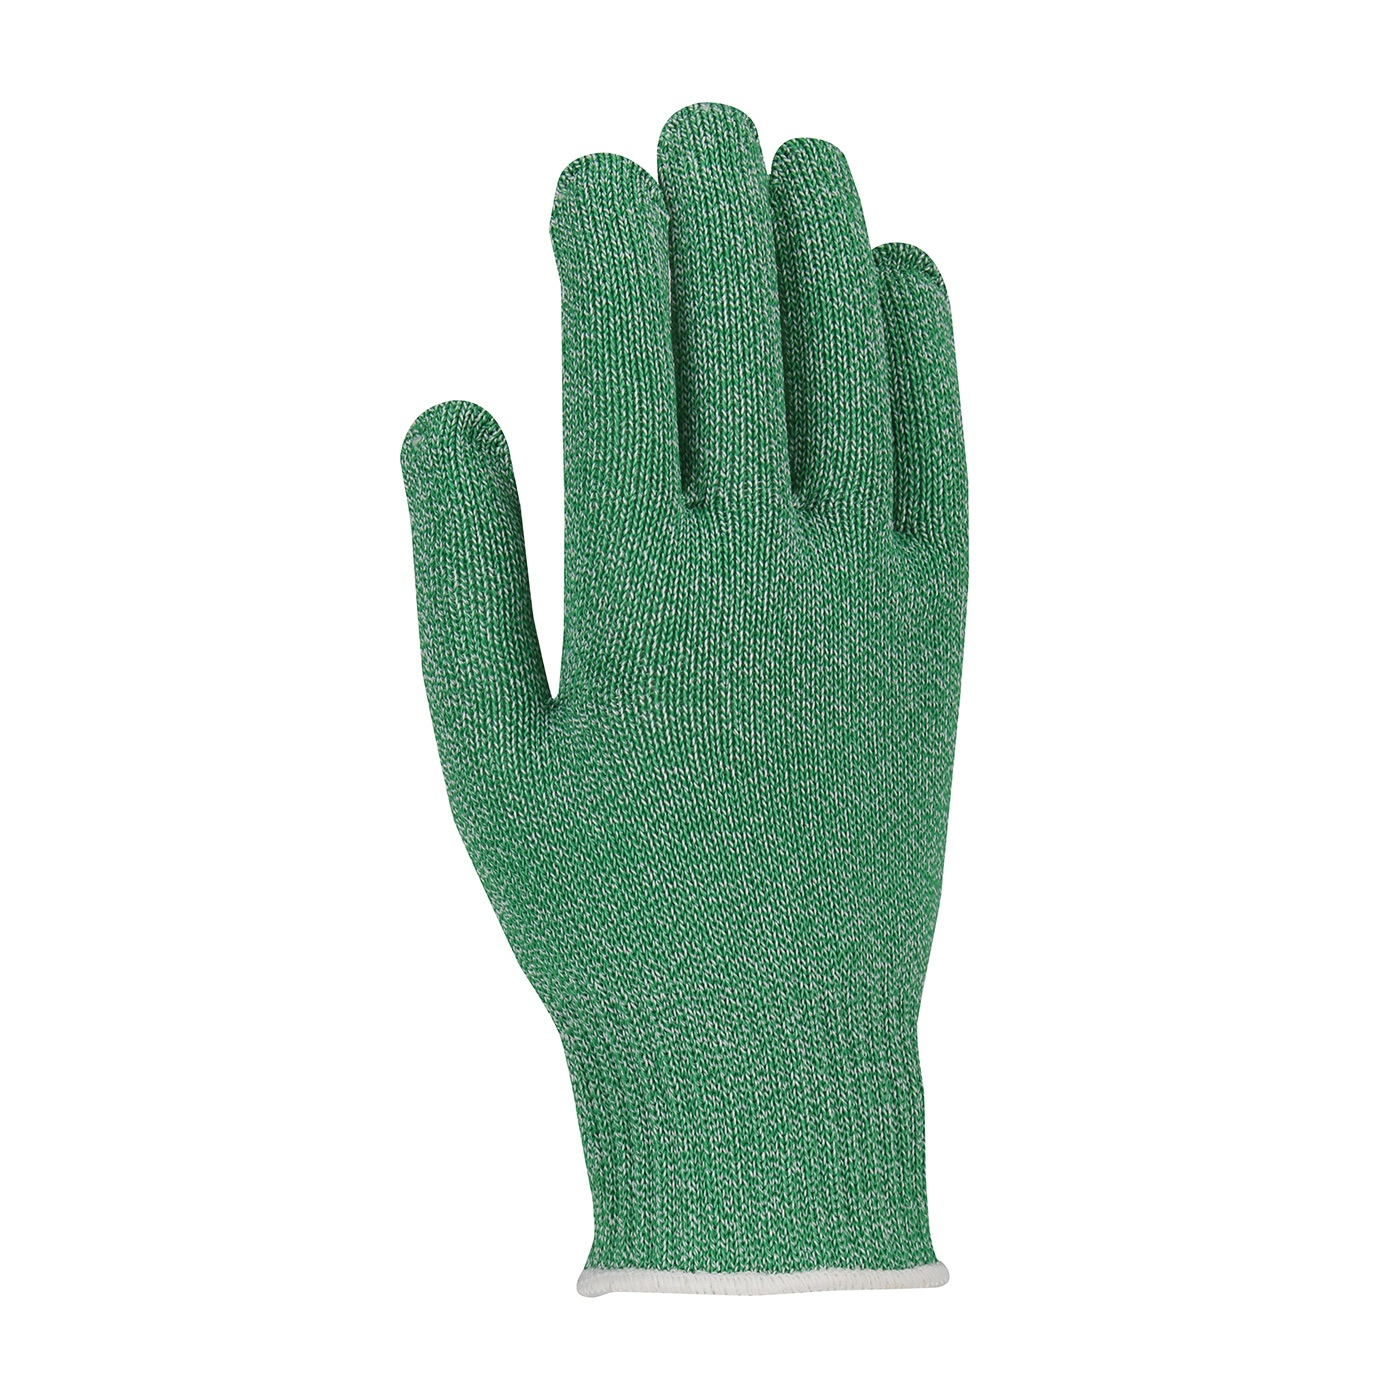 PIP® Kut-Gard® 22-760GRN/L Anti-Microbial Medium Weight Unisex Cut Resistant Gloves, L, Uncoated Coating, Dyneema®/Polyester/Silica/Stainless Steel/Synthetic Fiber, Elastic/Knit Wrist Cuff, Resists: Cut, Shrink and Slash, ANSI Cut-Resistance Level: A7